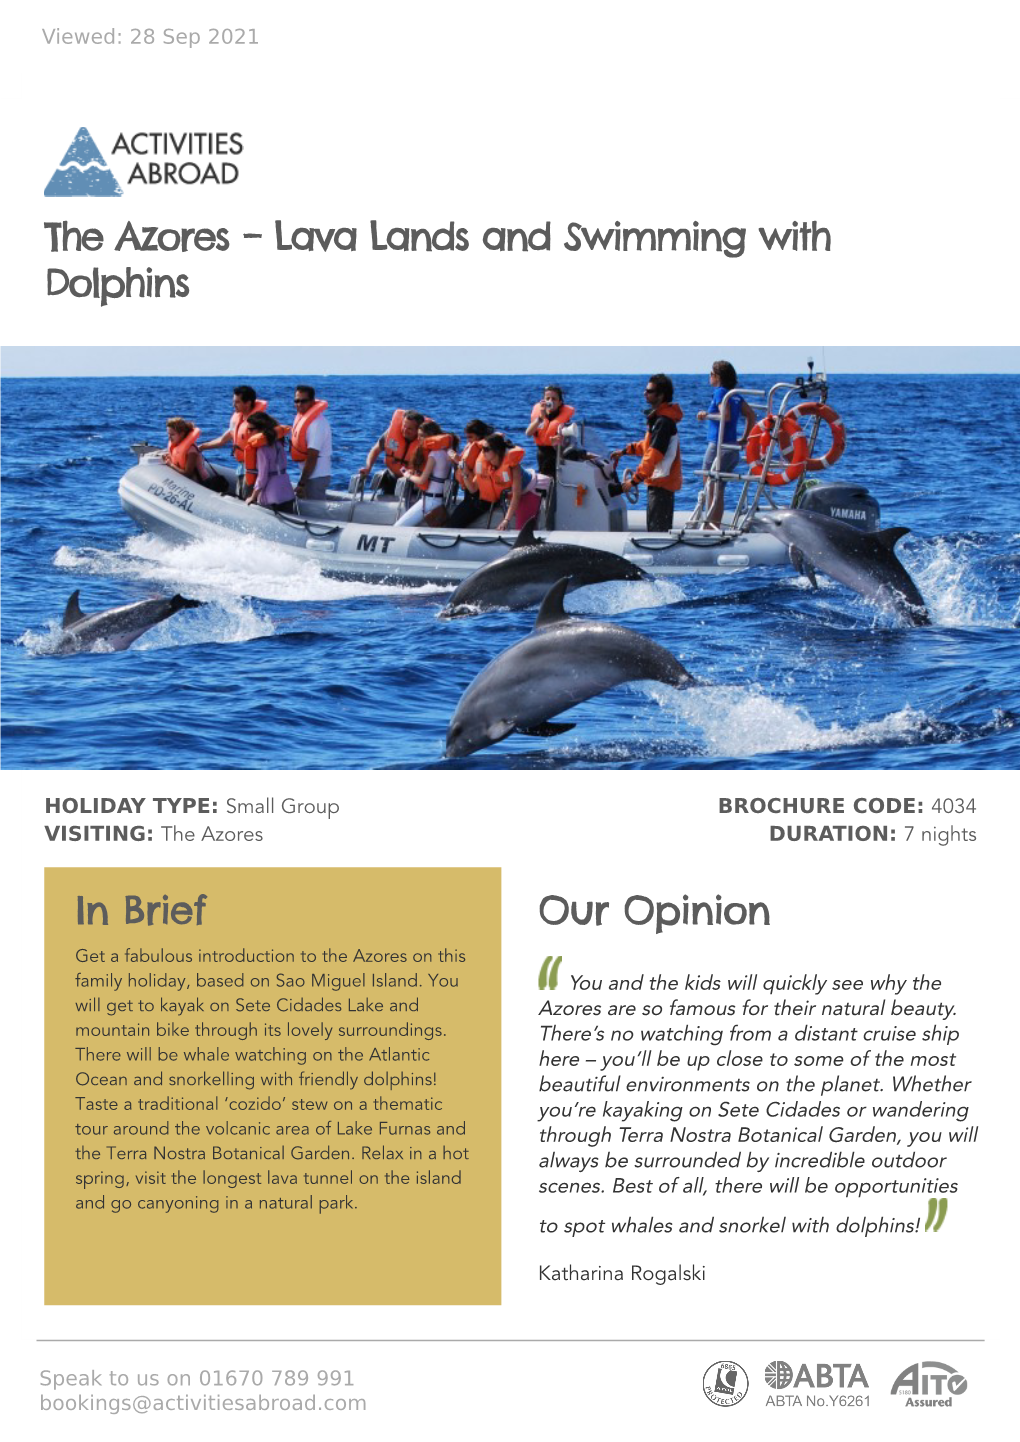 The Azores – Lava Lands and Swimming with Dolphins